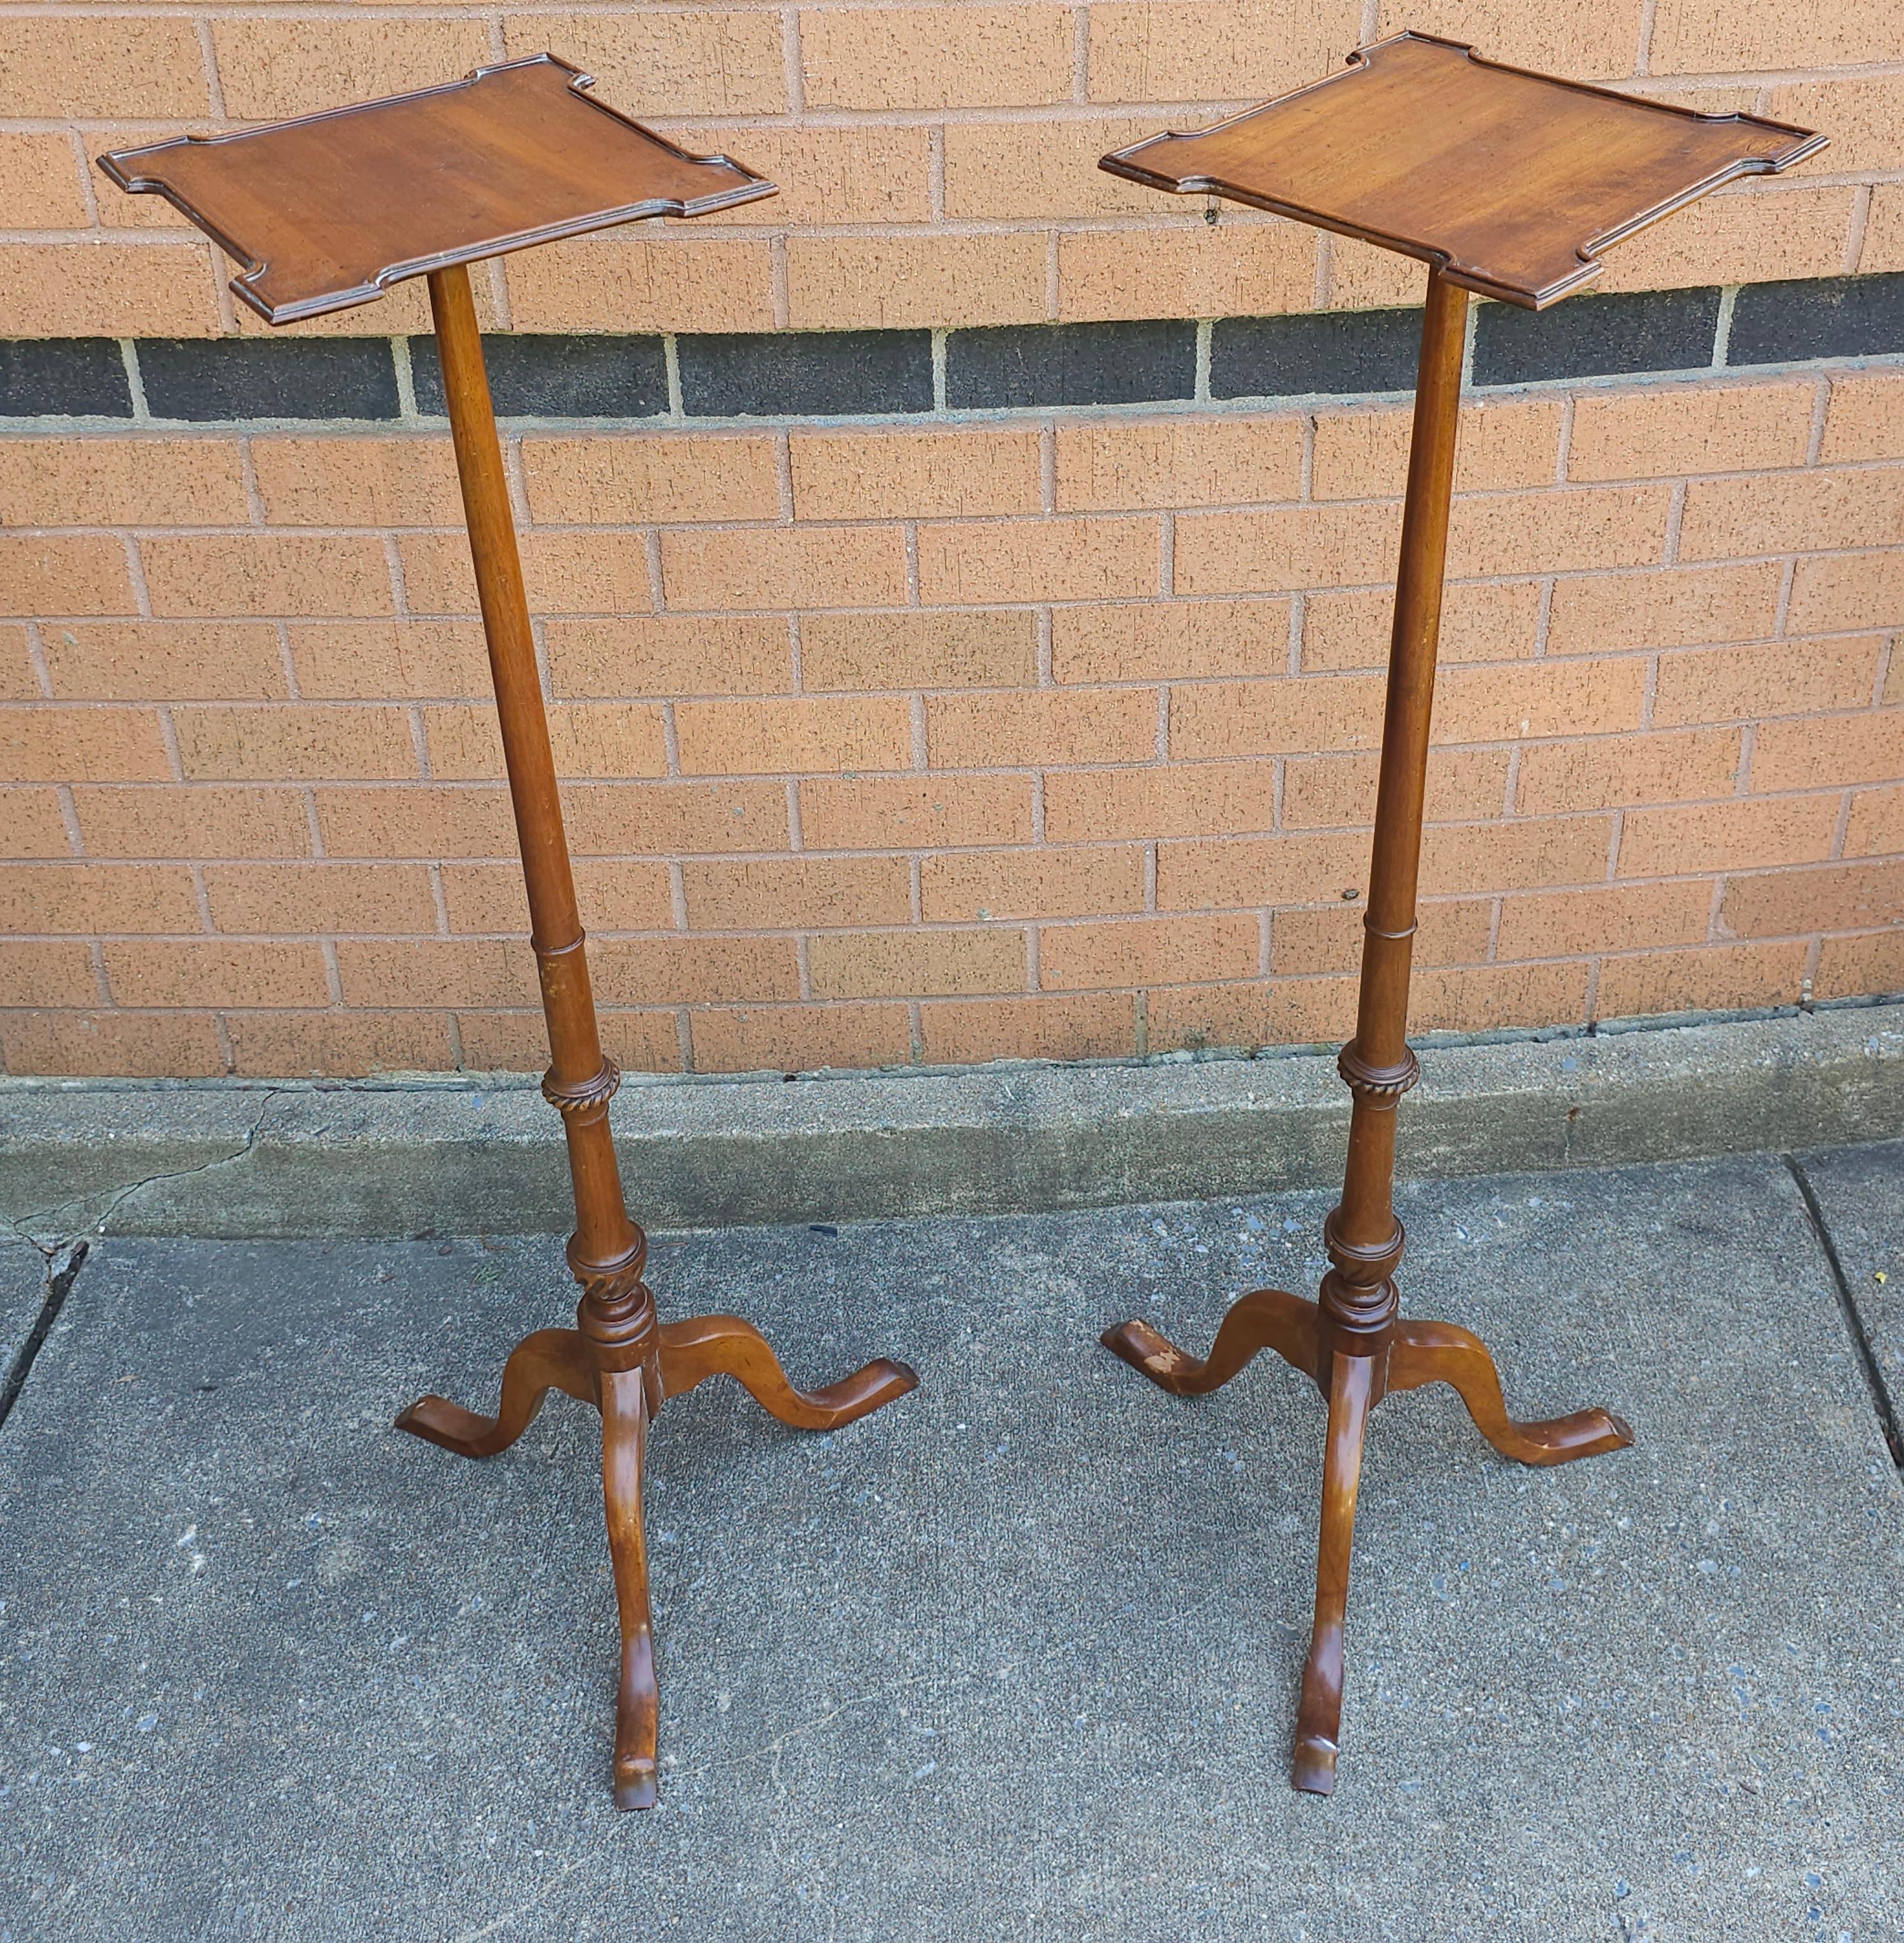 A Pair of Beacon Hill Collection Mahogany  Pedestal Tripod Fern / Plant Stands in great vintage condition.
Measures 16.5